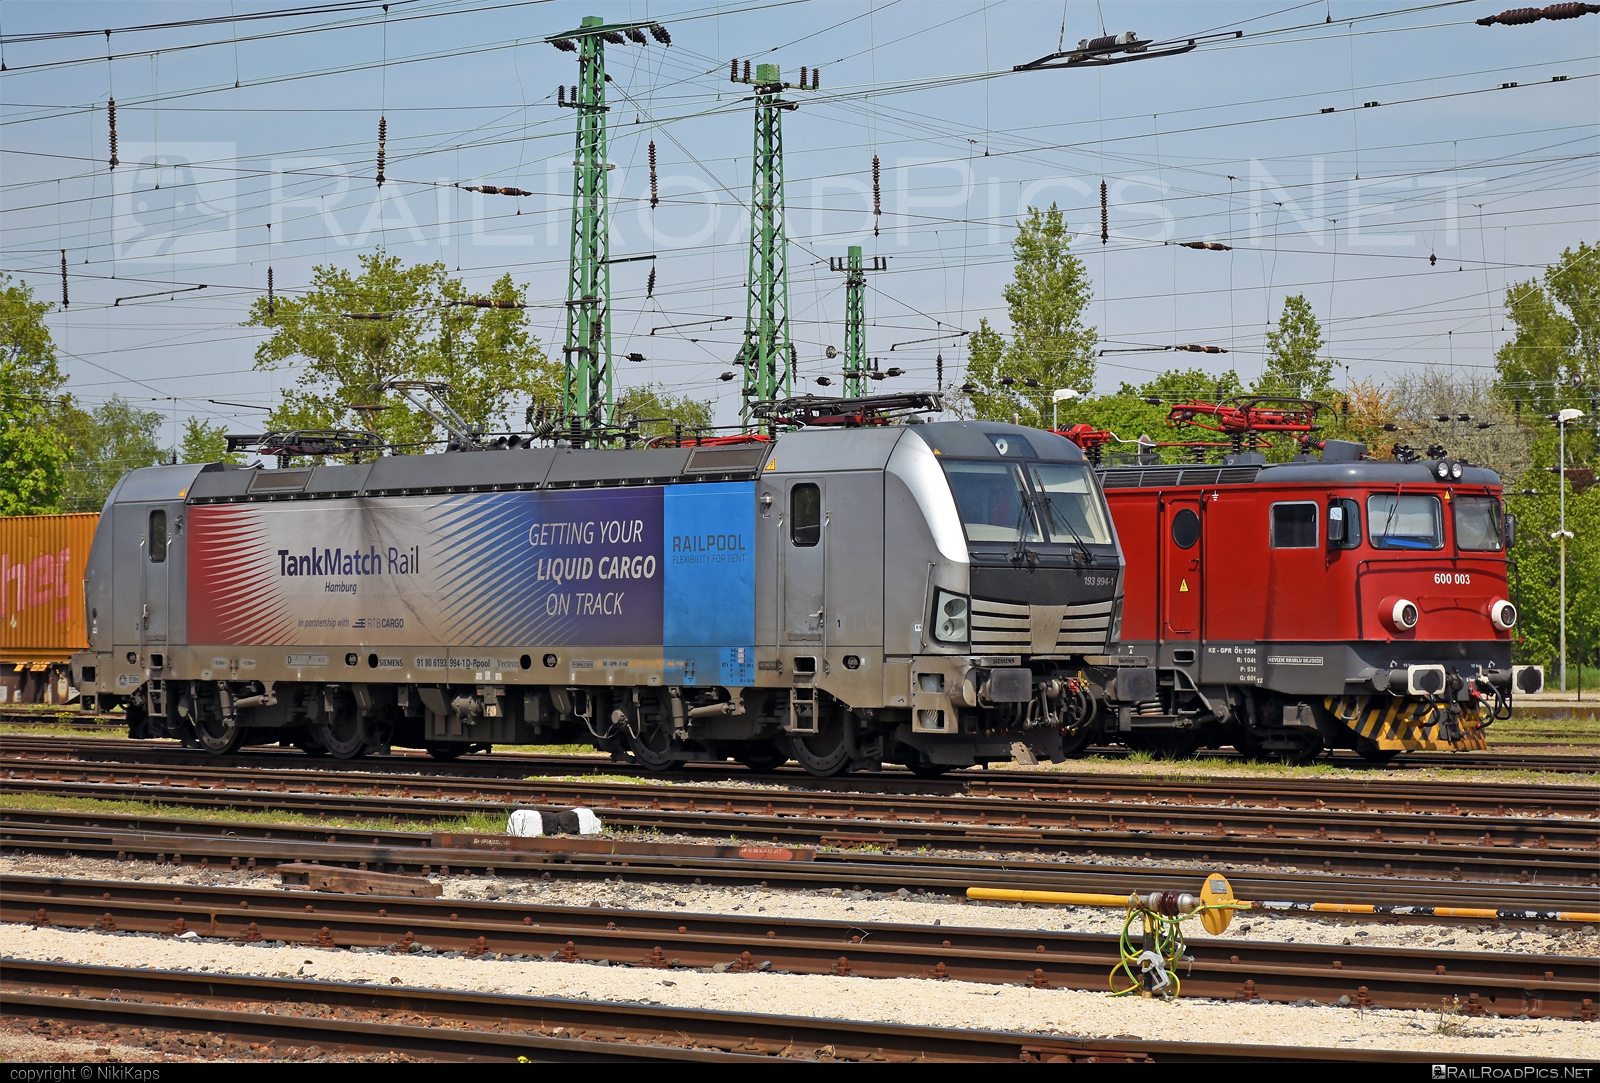 Siemens Vectron AC - 193 994-1 operated by RTB Cargo GmbH #railpool #railpoolgmbh #rtb #rtbcargo #siemens #siemensvectron #siemensvectronac #vectron #vectronac